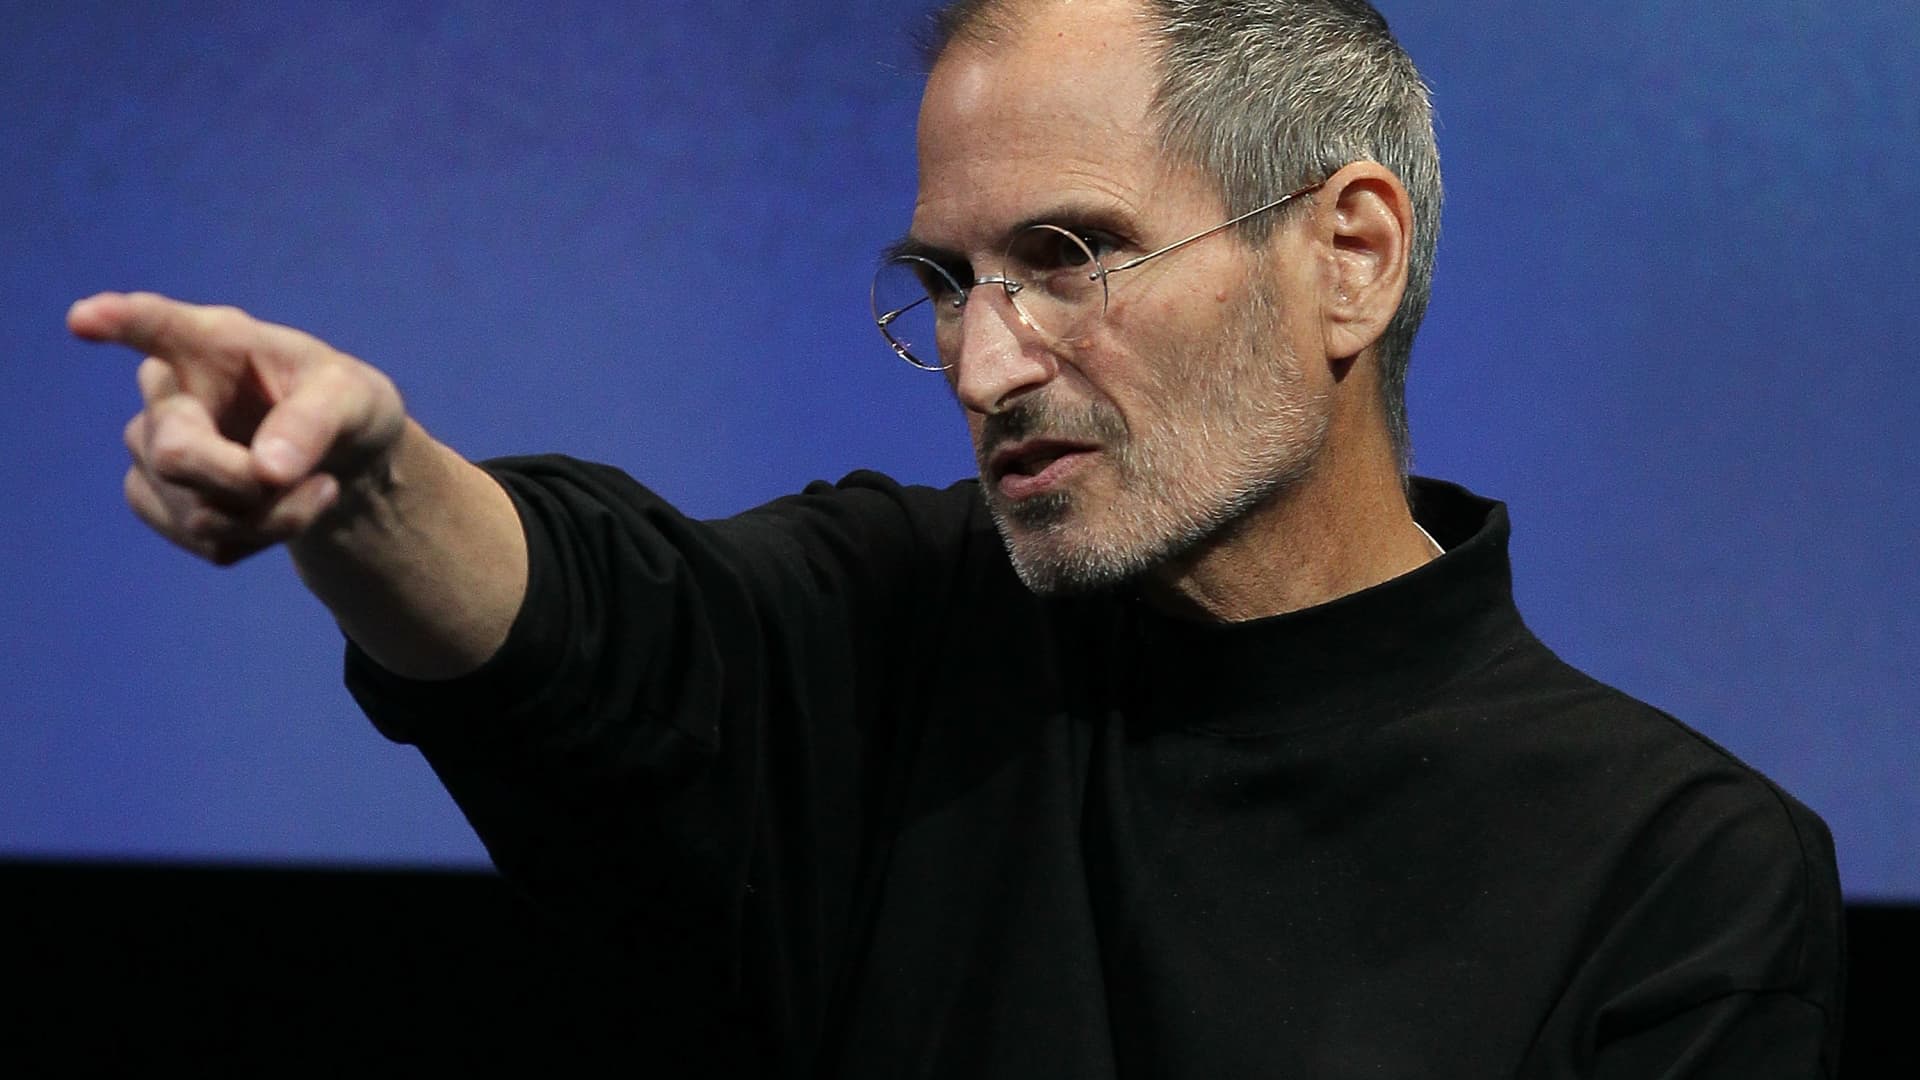 Steve Jobs' former intern reflects on working for the tech mogul: 'I worked 20 yards away from him every day'